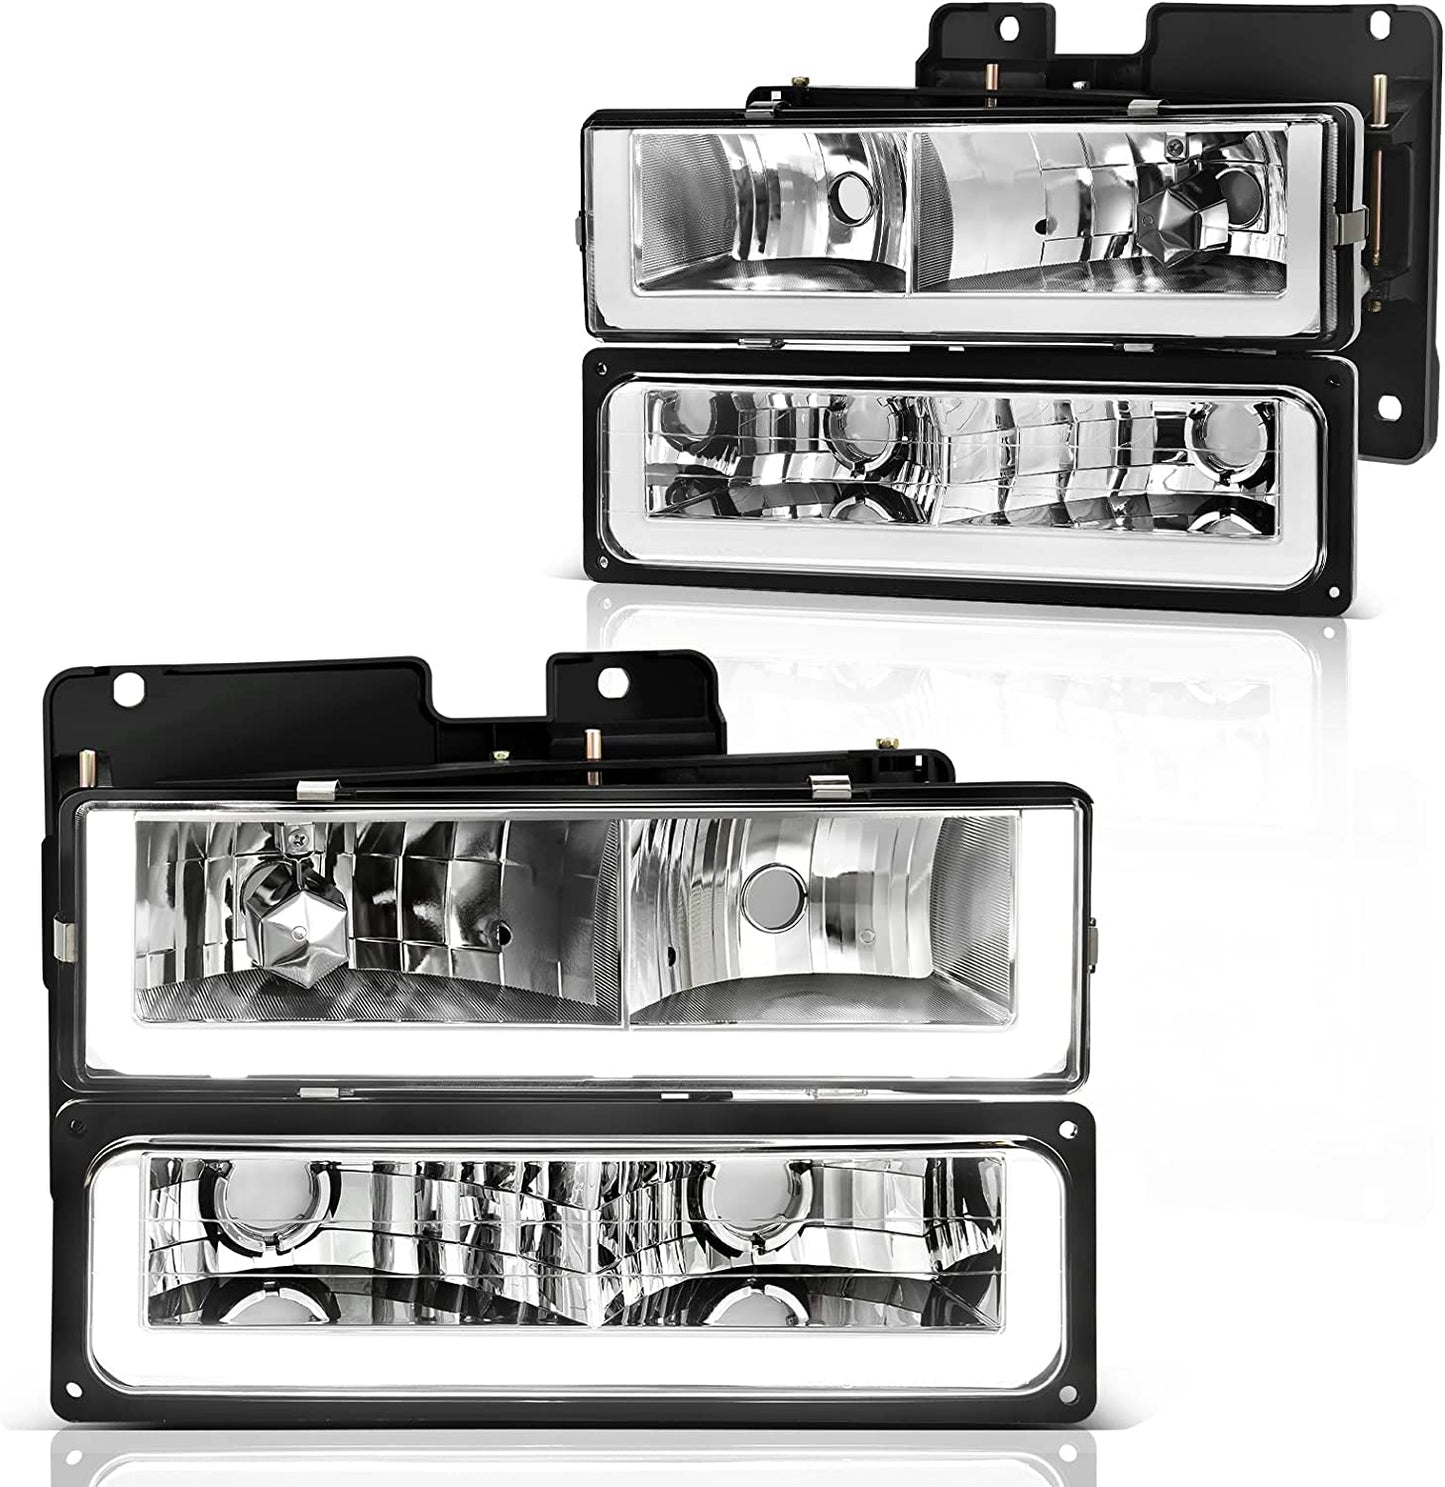 DWVO Headlight Assembly Compatible with 1994-1999 Chevy C/K Series 1500, 2500, 3500/Tahoe/Suburban/Silverado, w/Corner and Bumper Lights, Black Housing